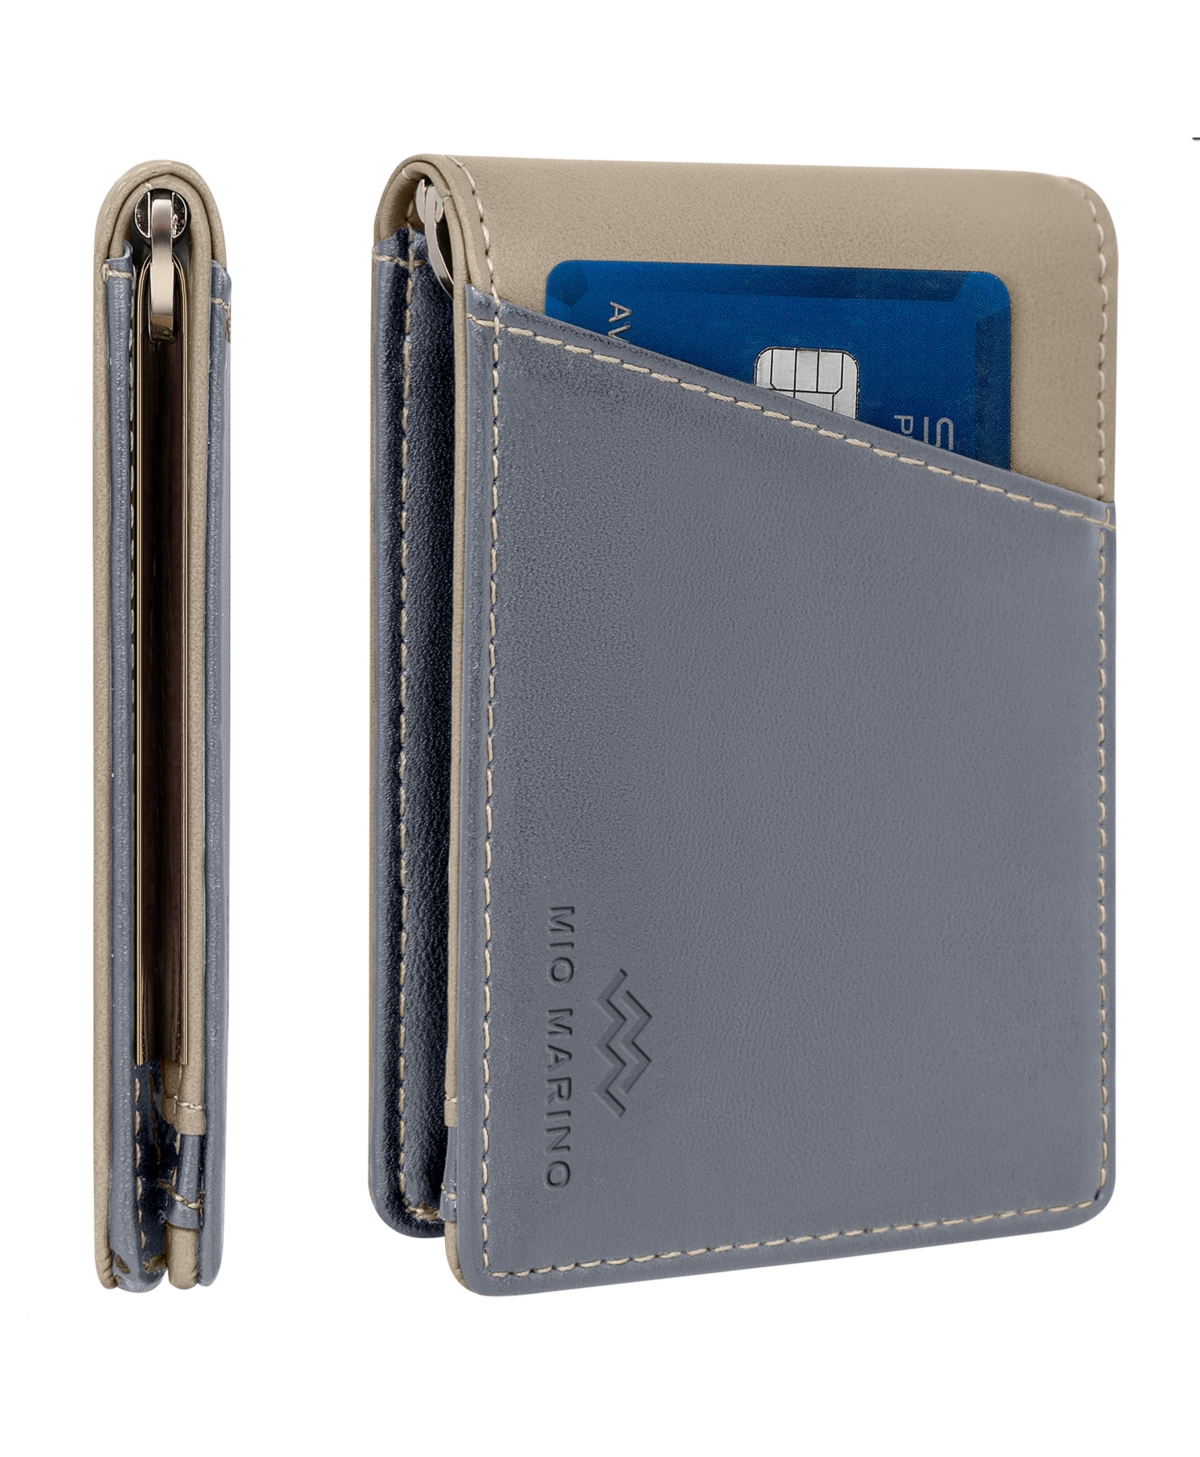 Men's Slim Bifold Wallet with Quick Access Pull Tab - Gray/beige